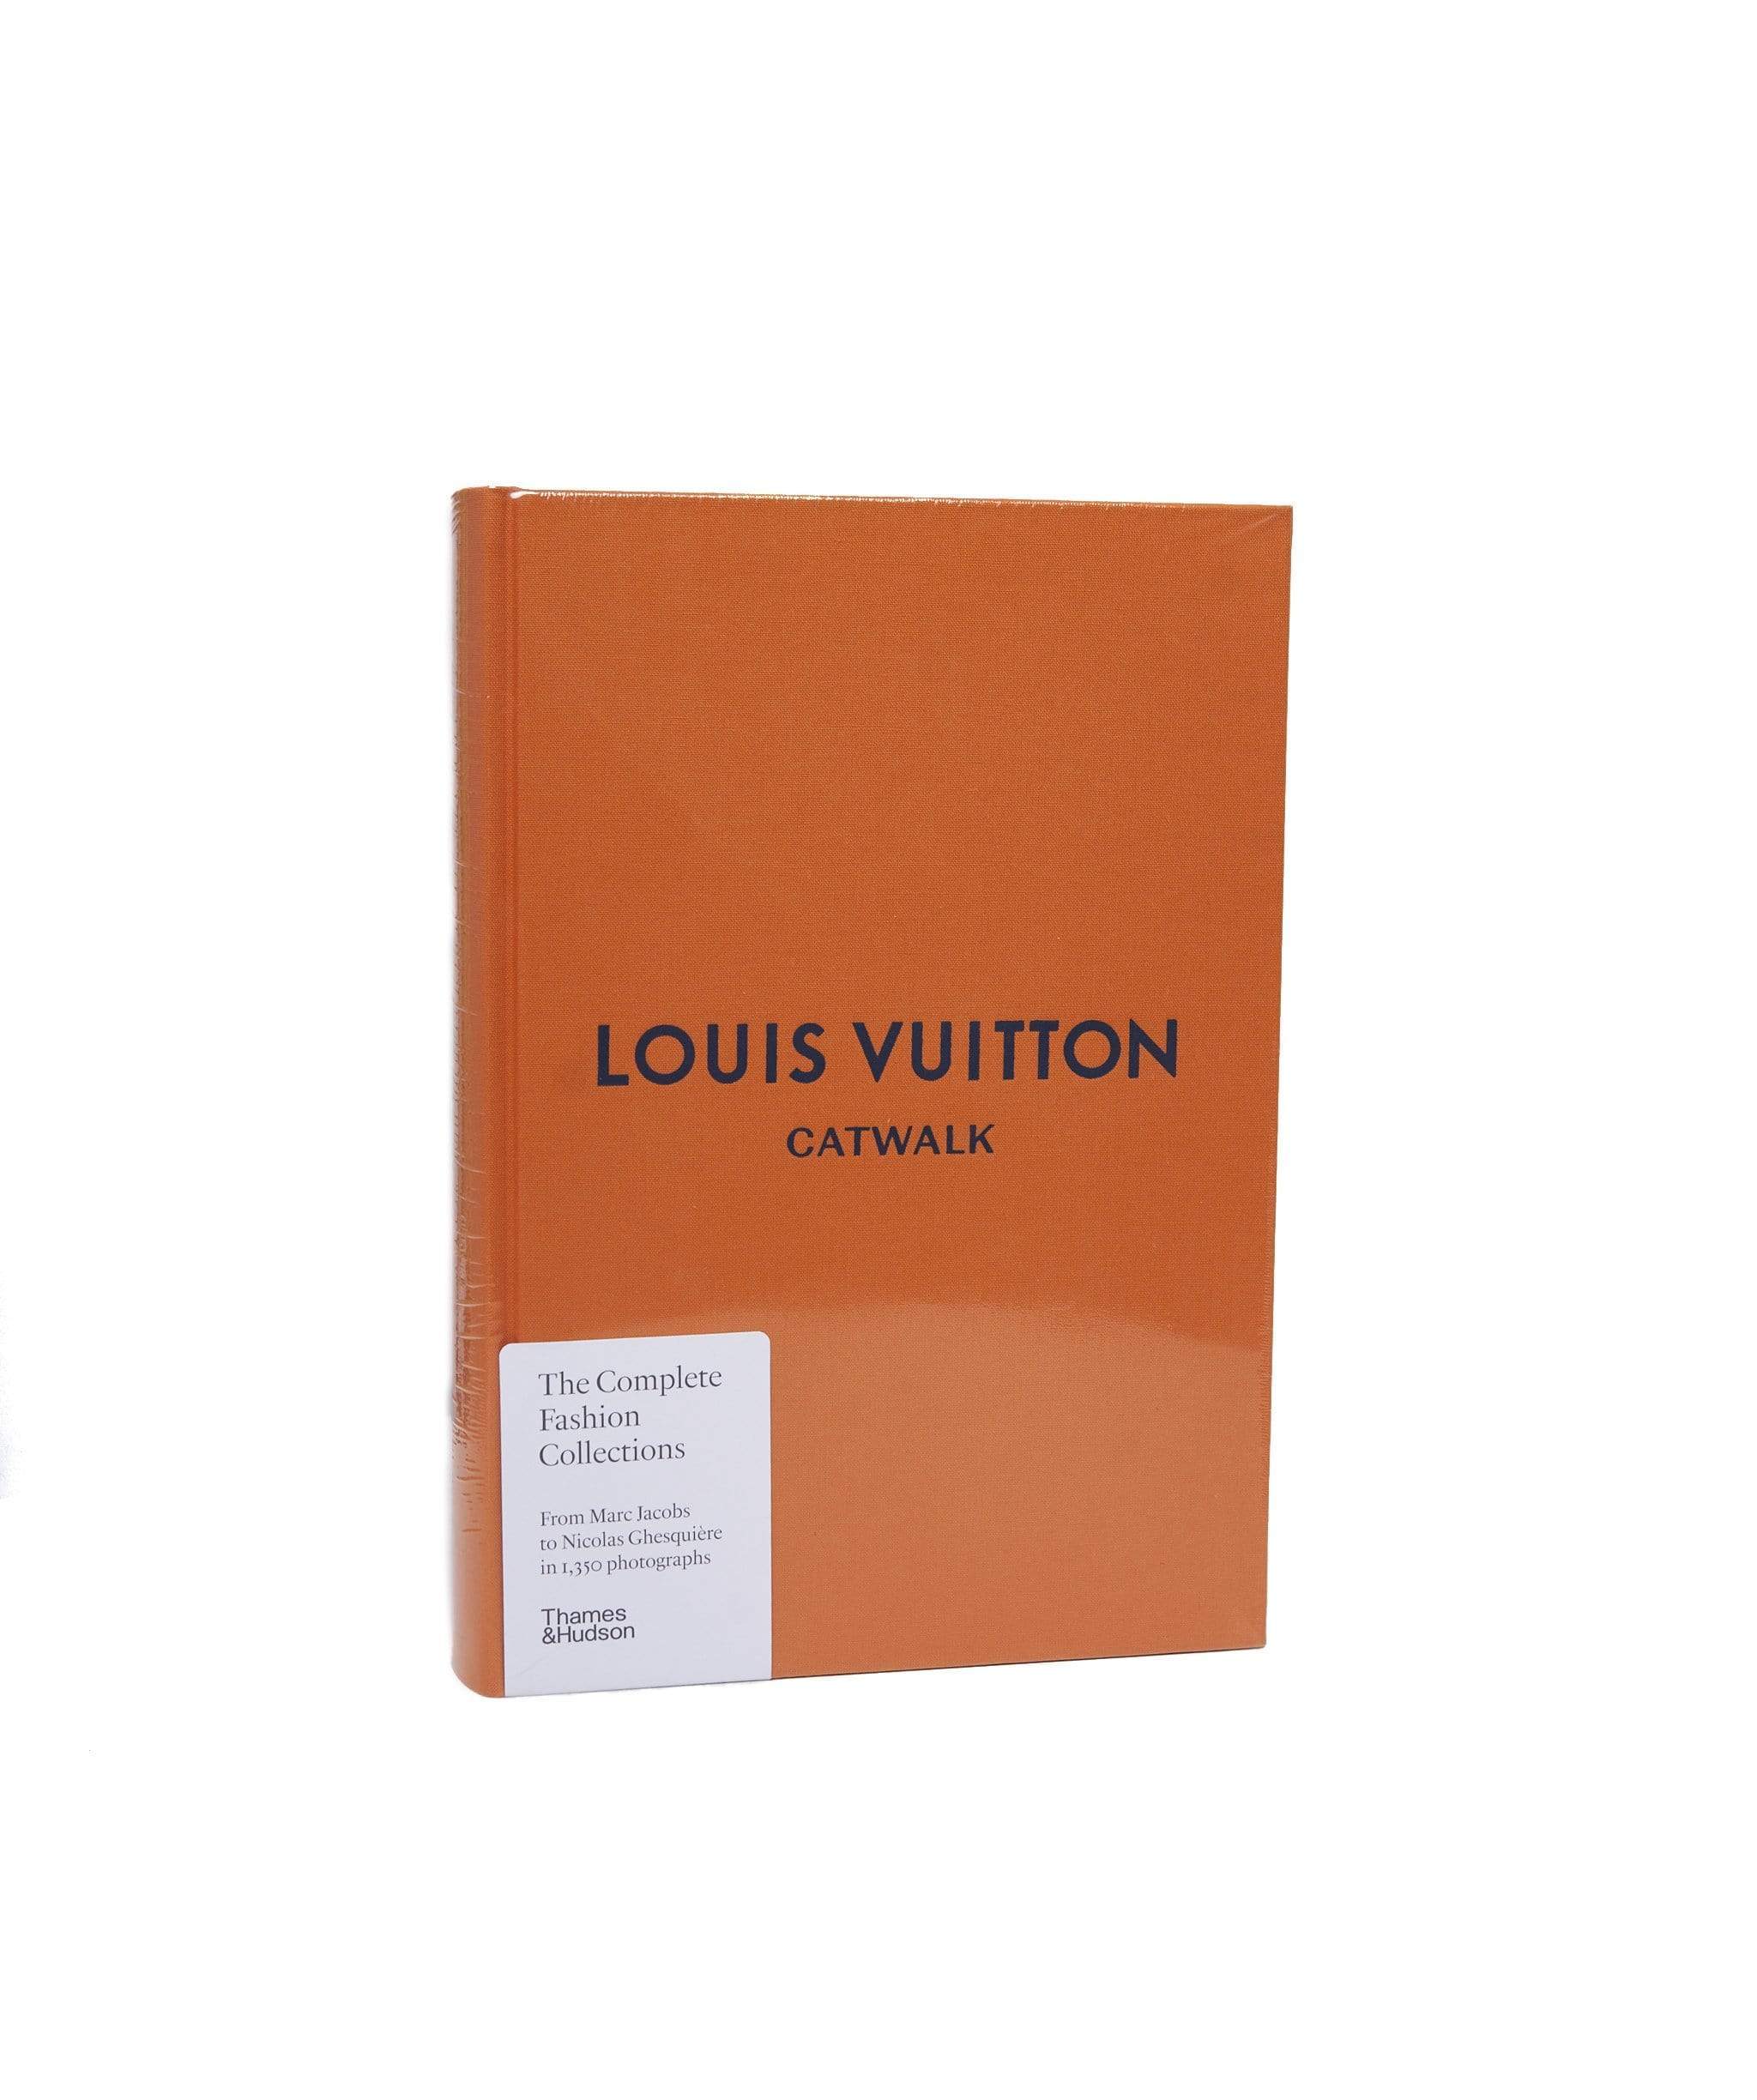 LOUIS VUITTON CATWALK BOOK - THE COMPLETE FASHION COLLECTIONS